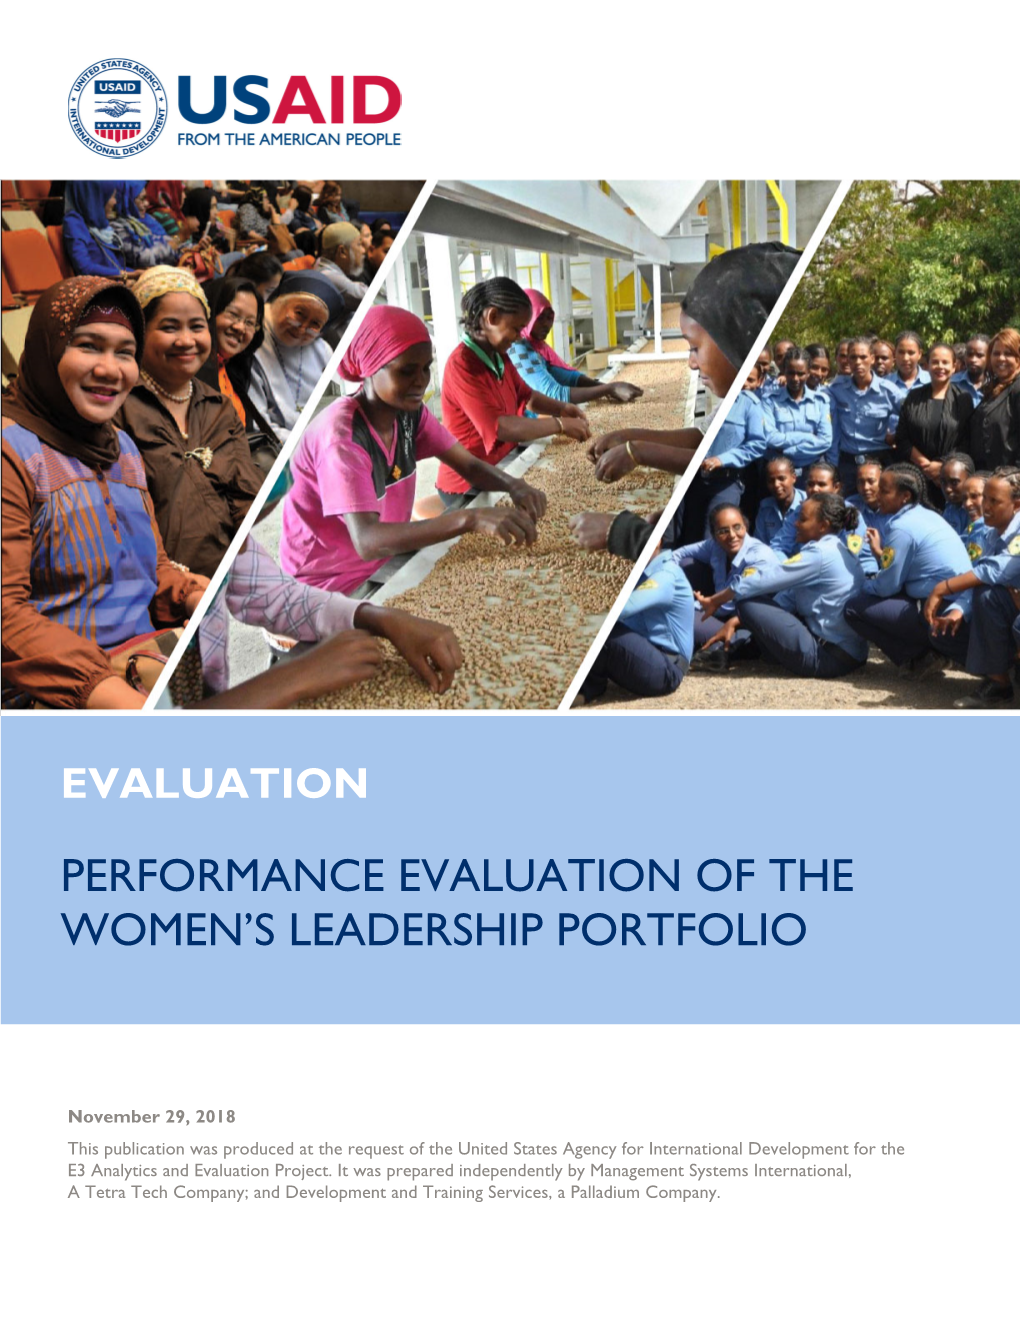 Performance Evaluation of the Women's Leadership